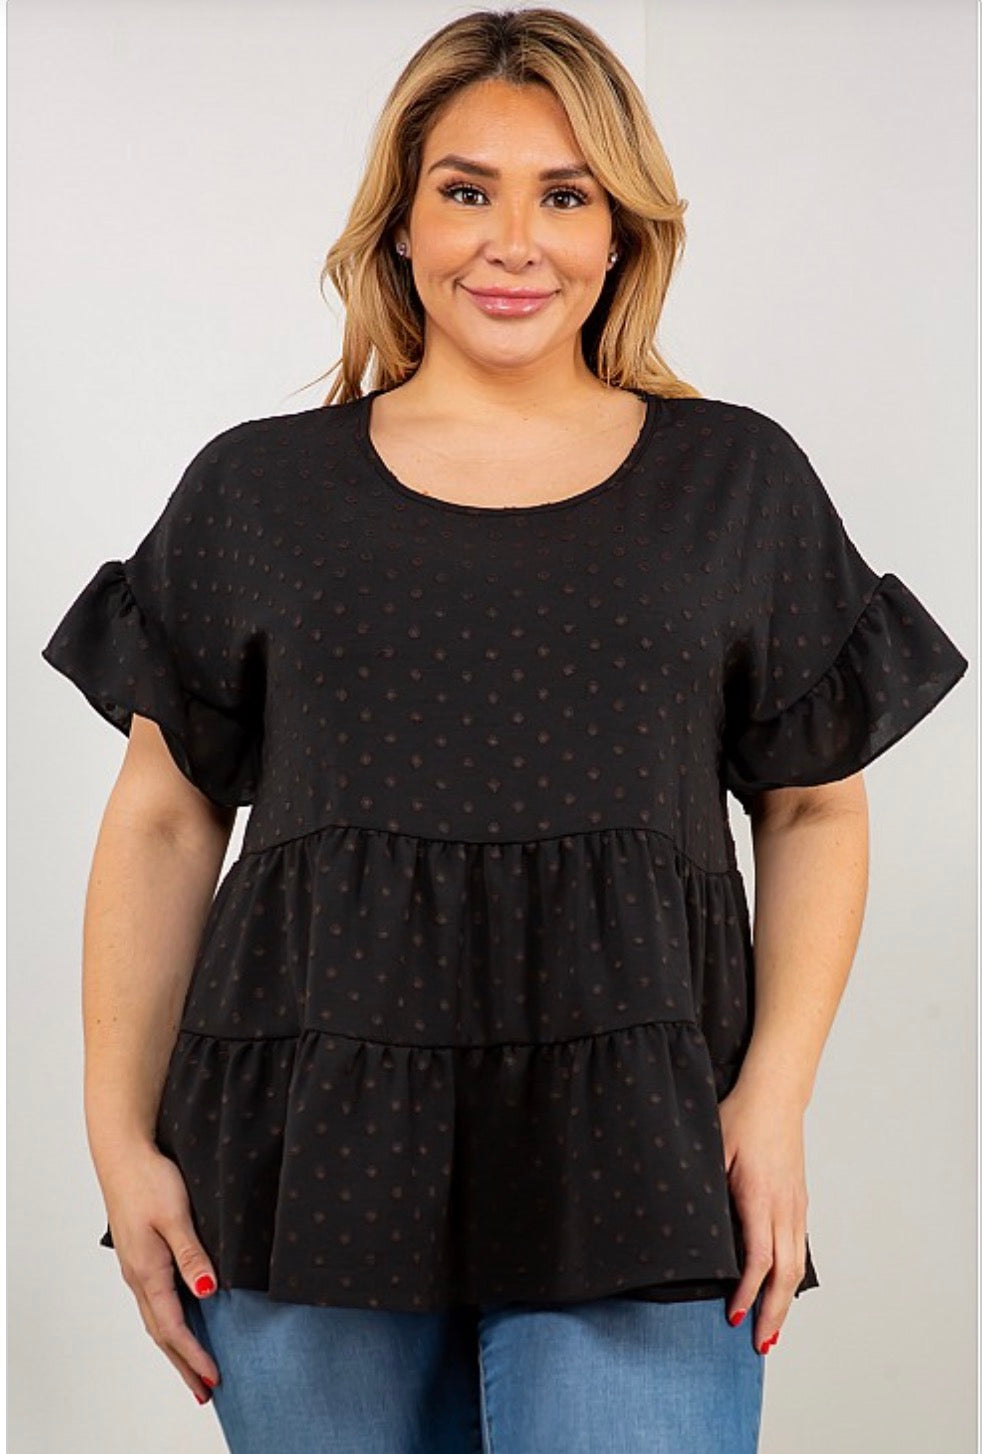 A woman wearing a Dot Ruffle Sleeve, Multi Tier Tunic Top from Spin USA in black with polka dots.